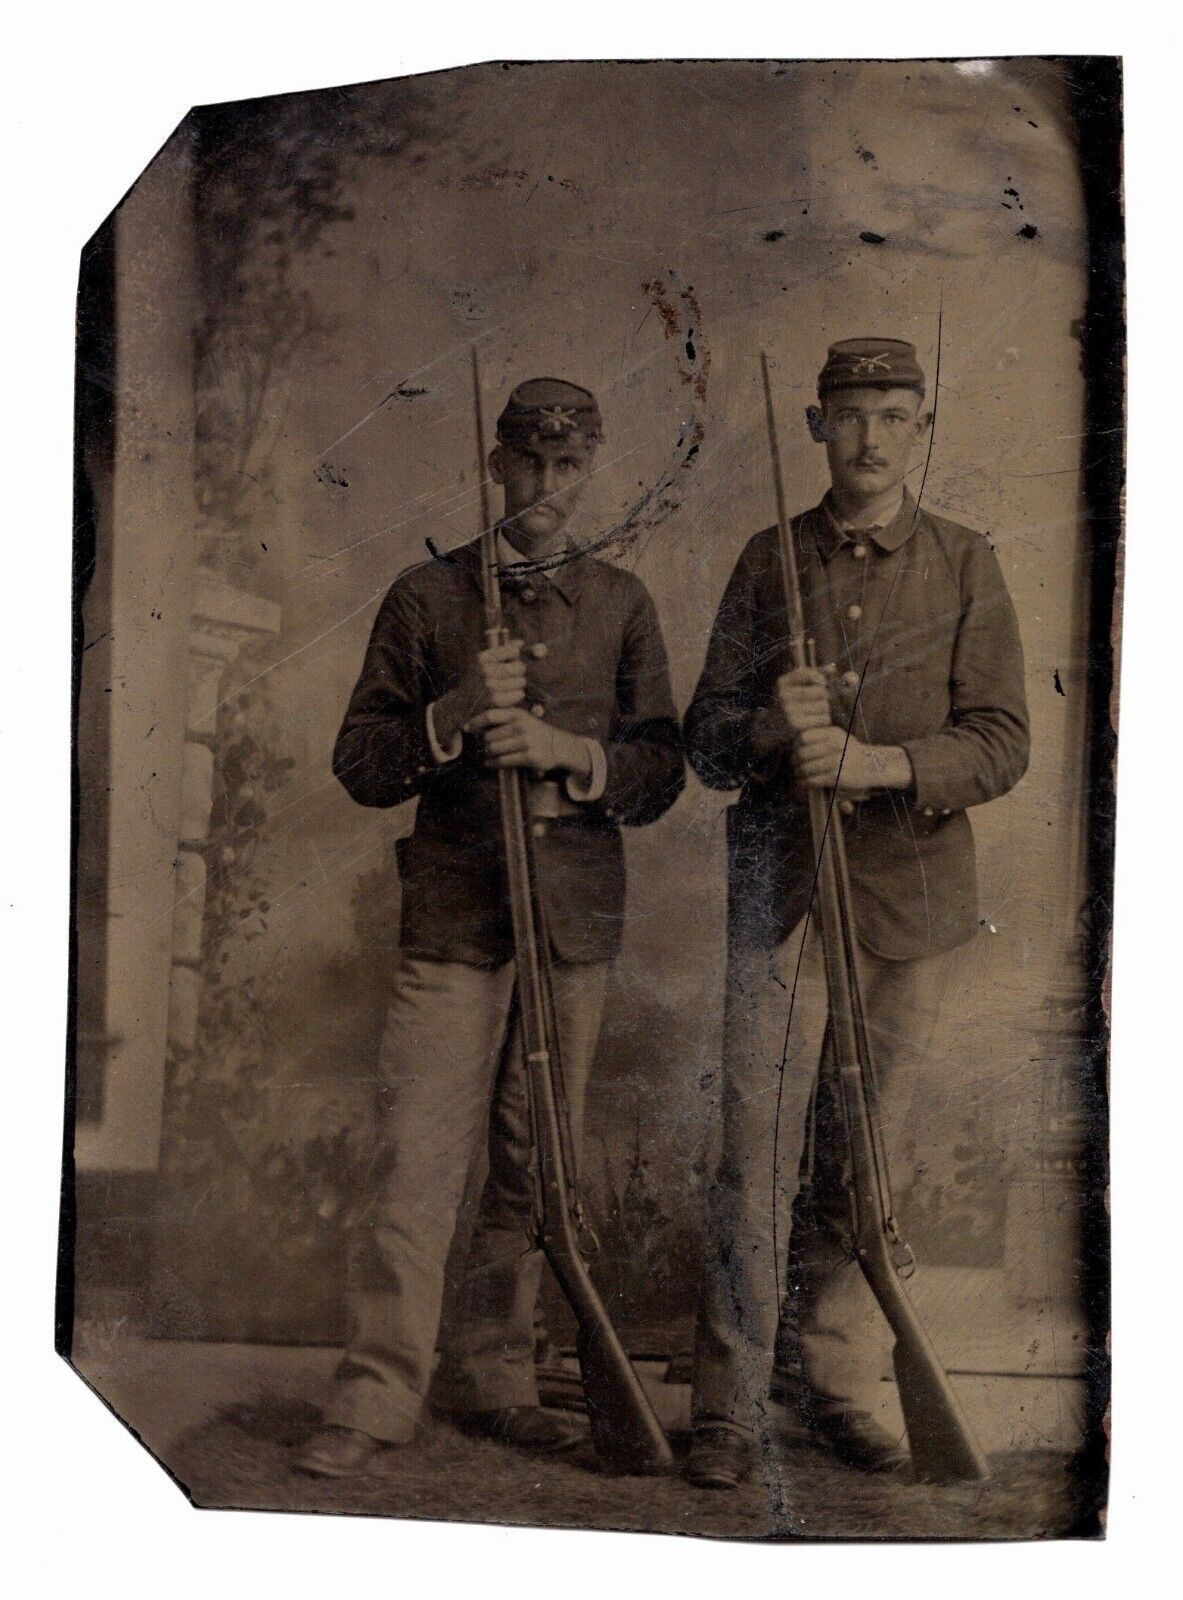 C. 1870s TINTYPE 8TH INFANTRY DIVISION SOLDIERS IN UNIFORM HOLDING LONG RIFLES